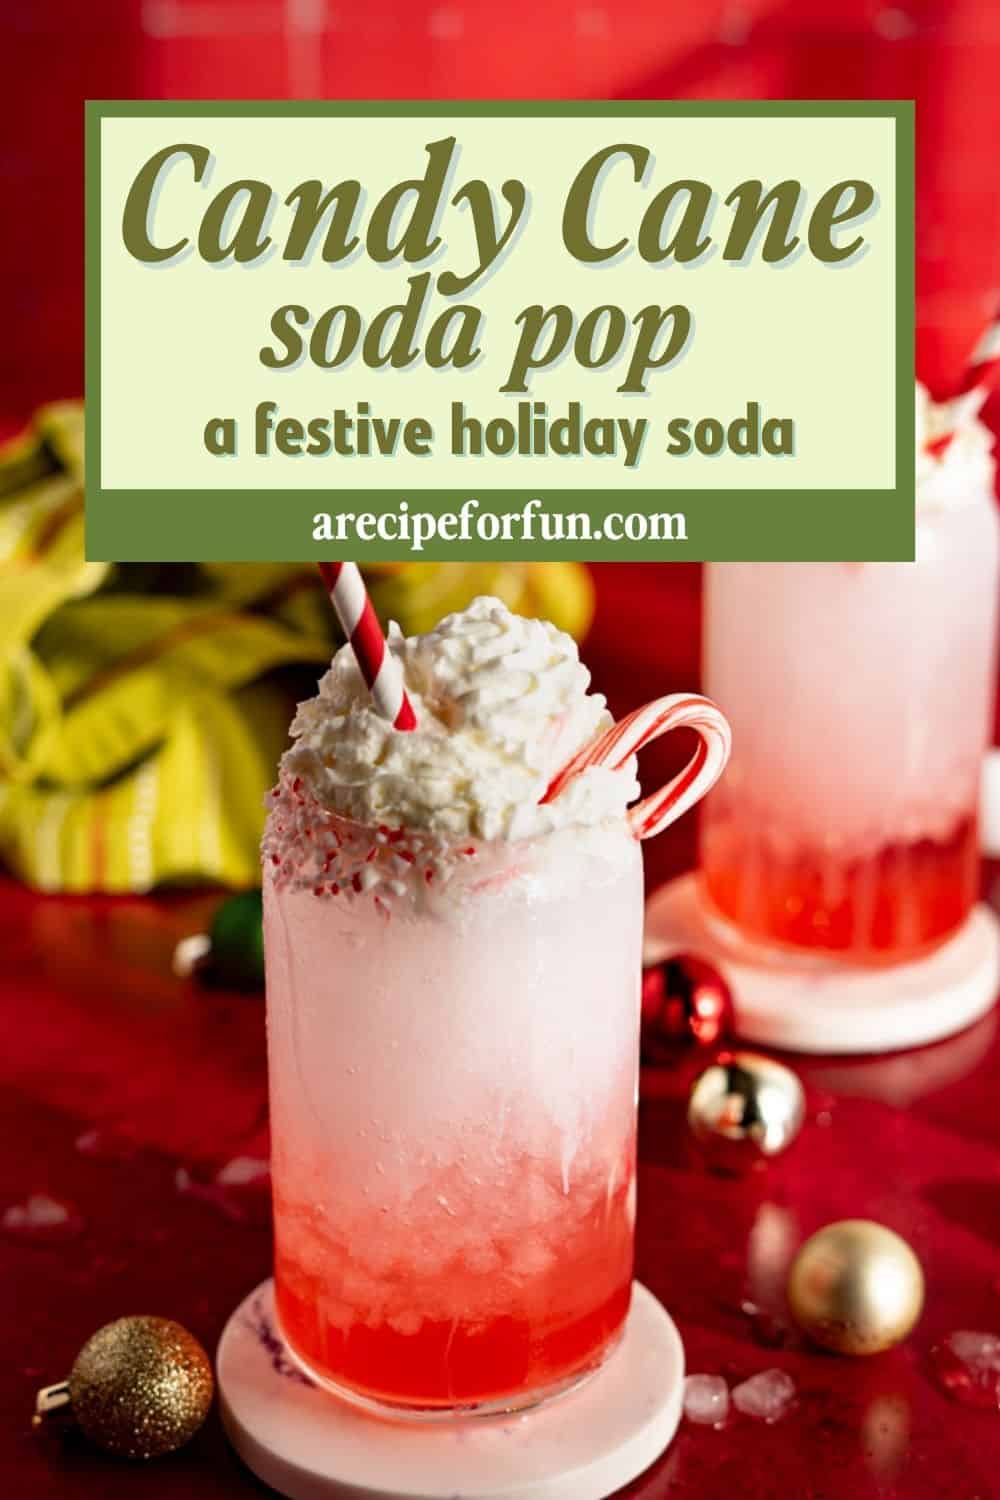 Pinterest Pin for a post about a recipe for a candy cane soda.